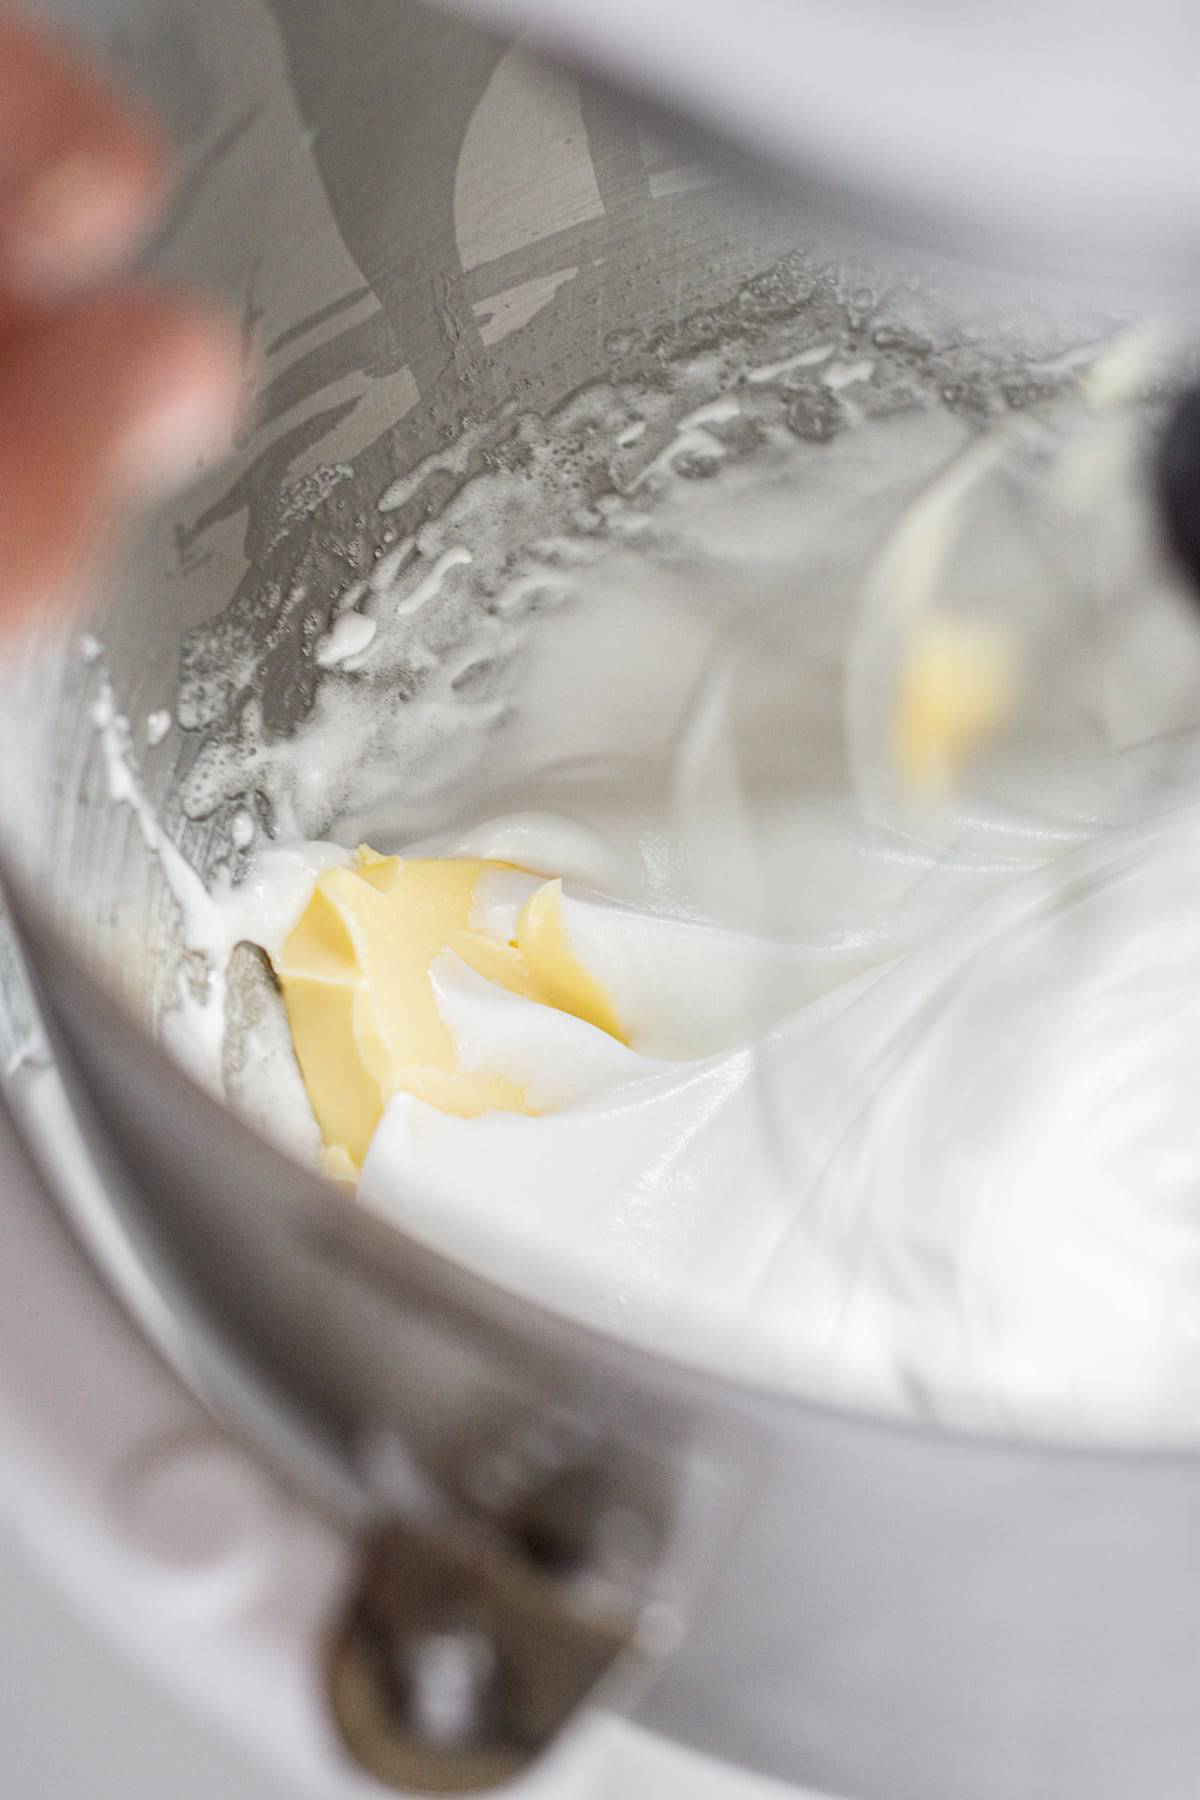 butter added to swiss meringue.